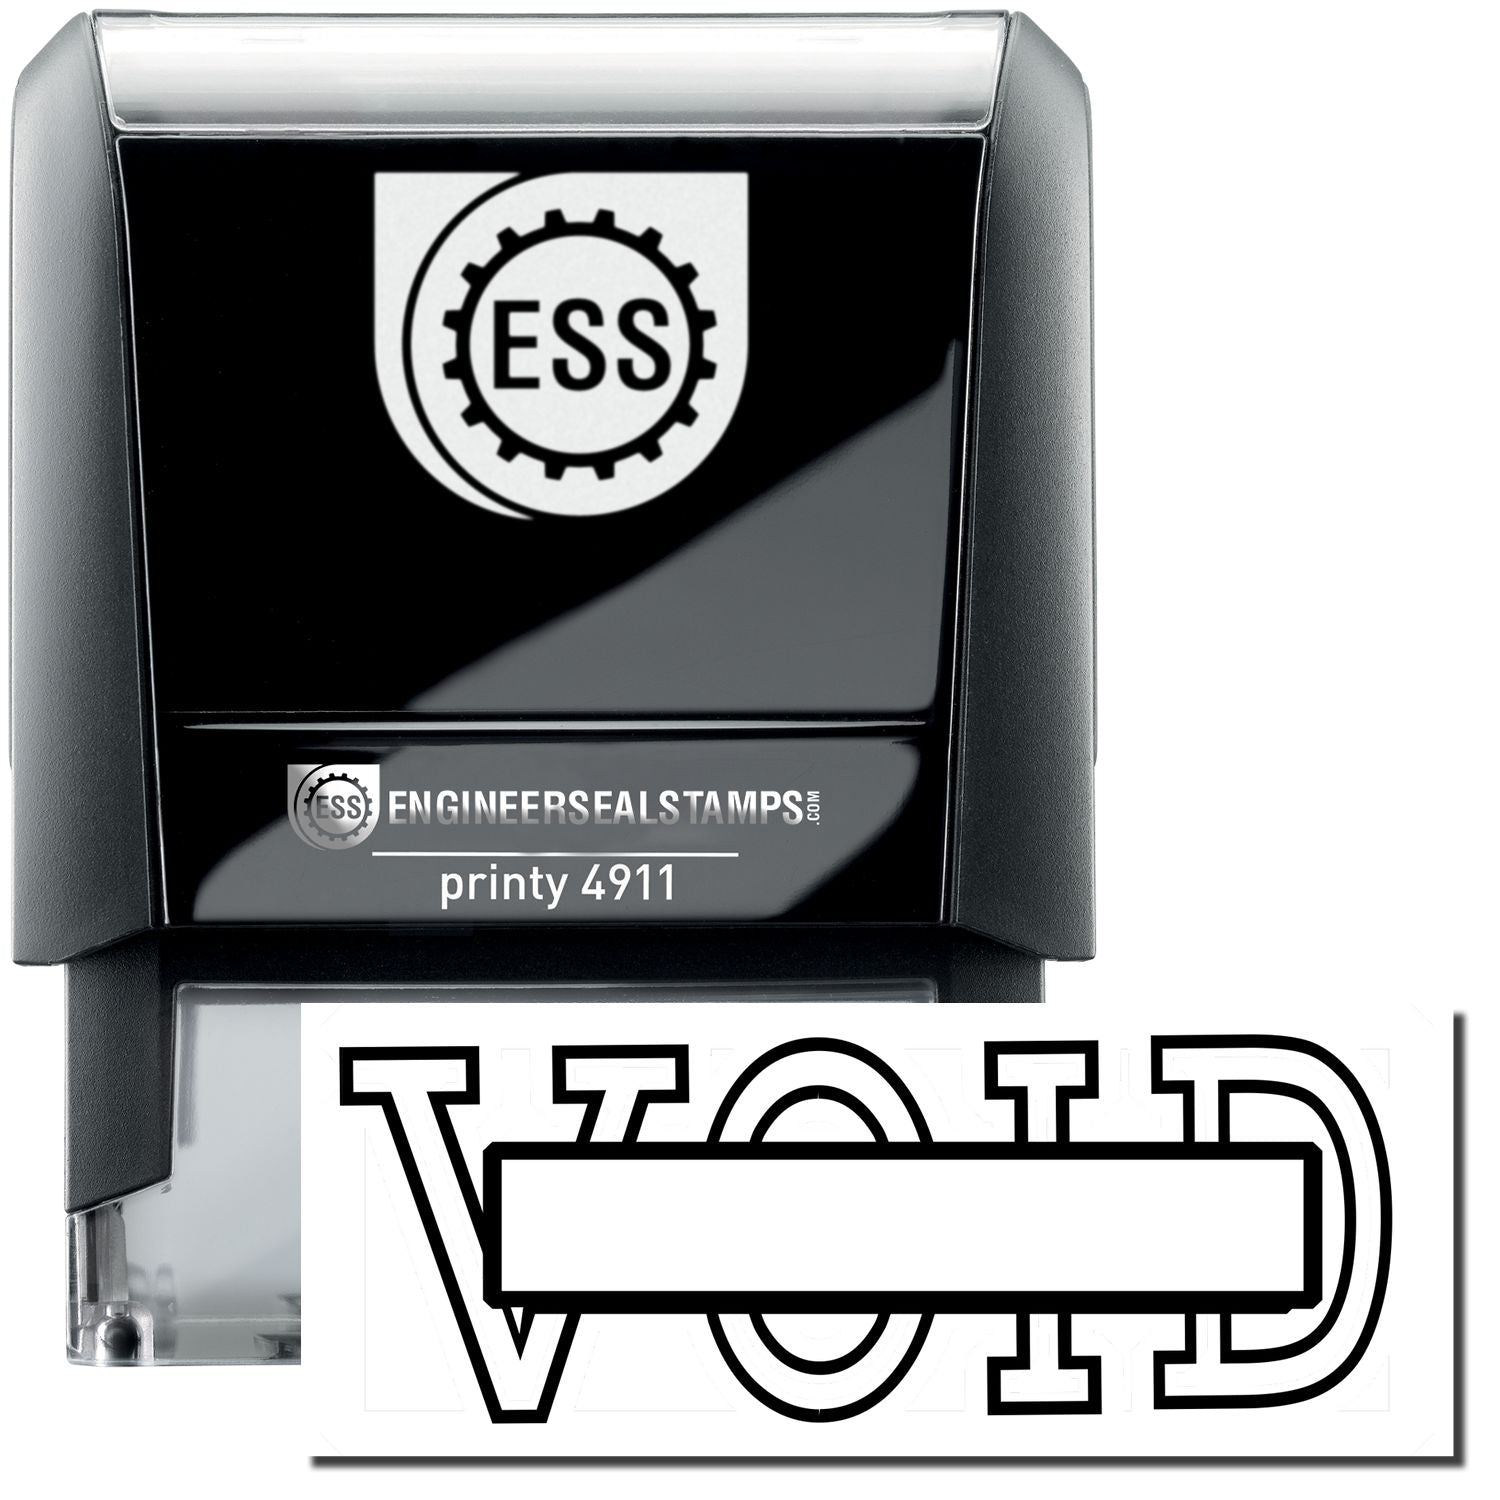 A self-inking stamp with a stamped image showing how the text "VOID" in an outline style with a box in the center of the text is displayed after stamping.